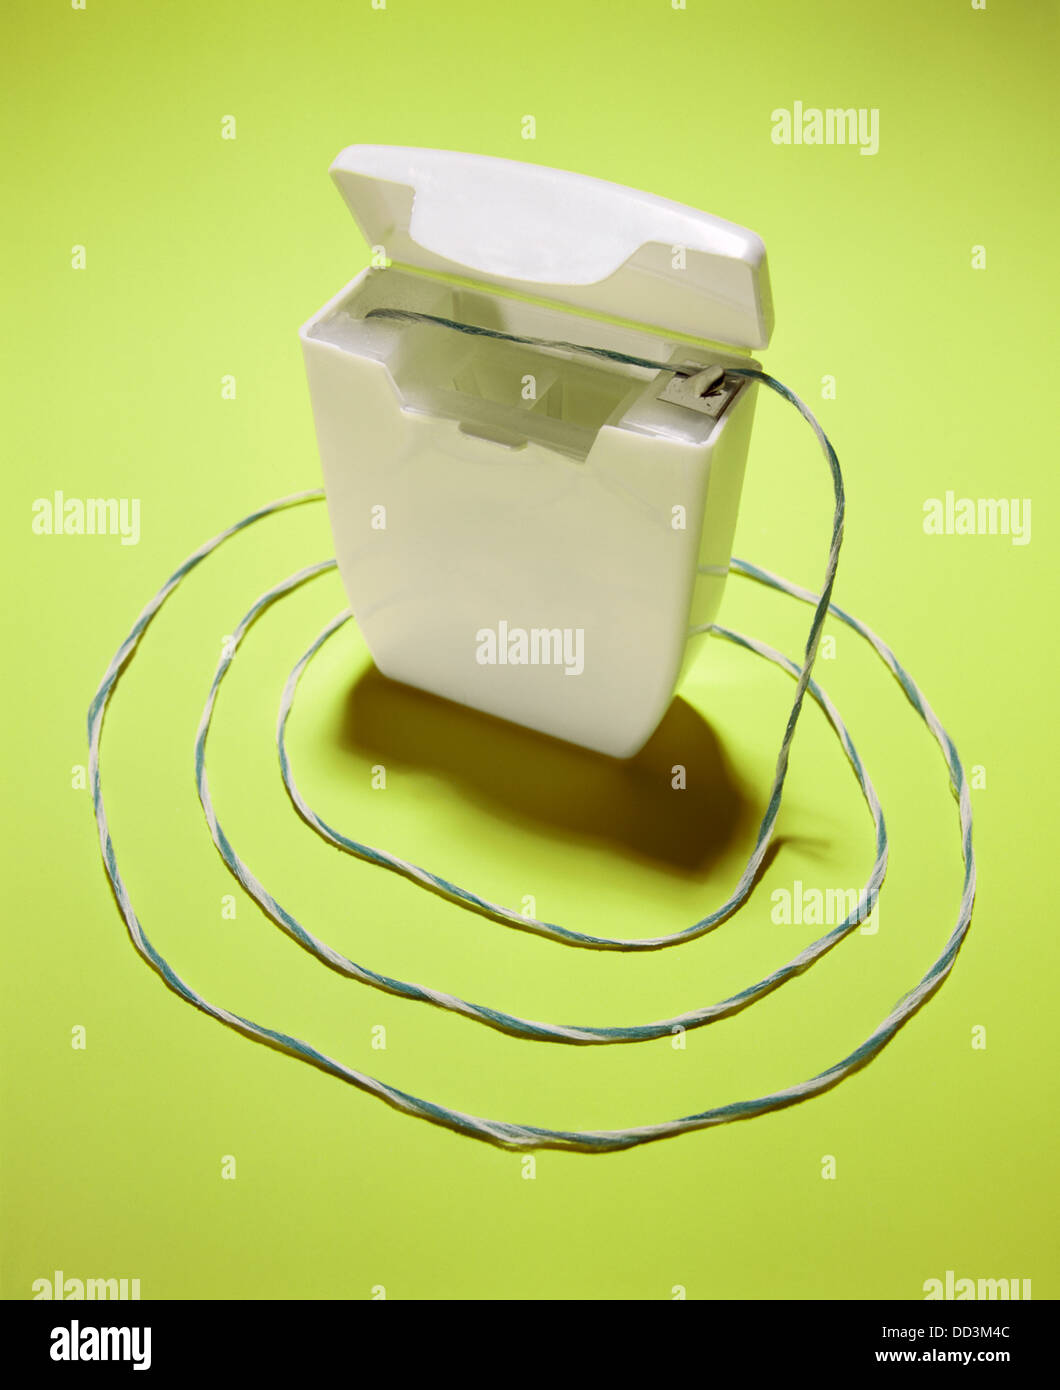 Dental floss string around a white container. Stock Photo